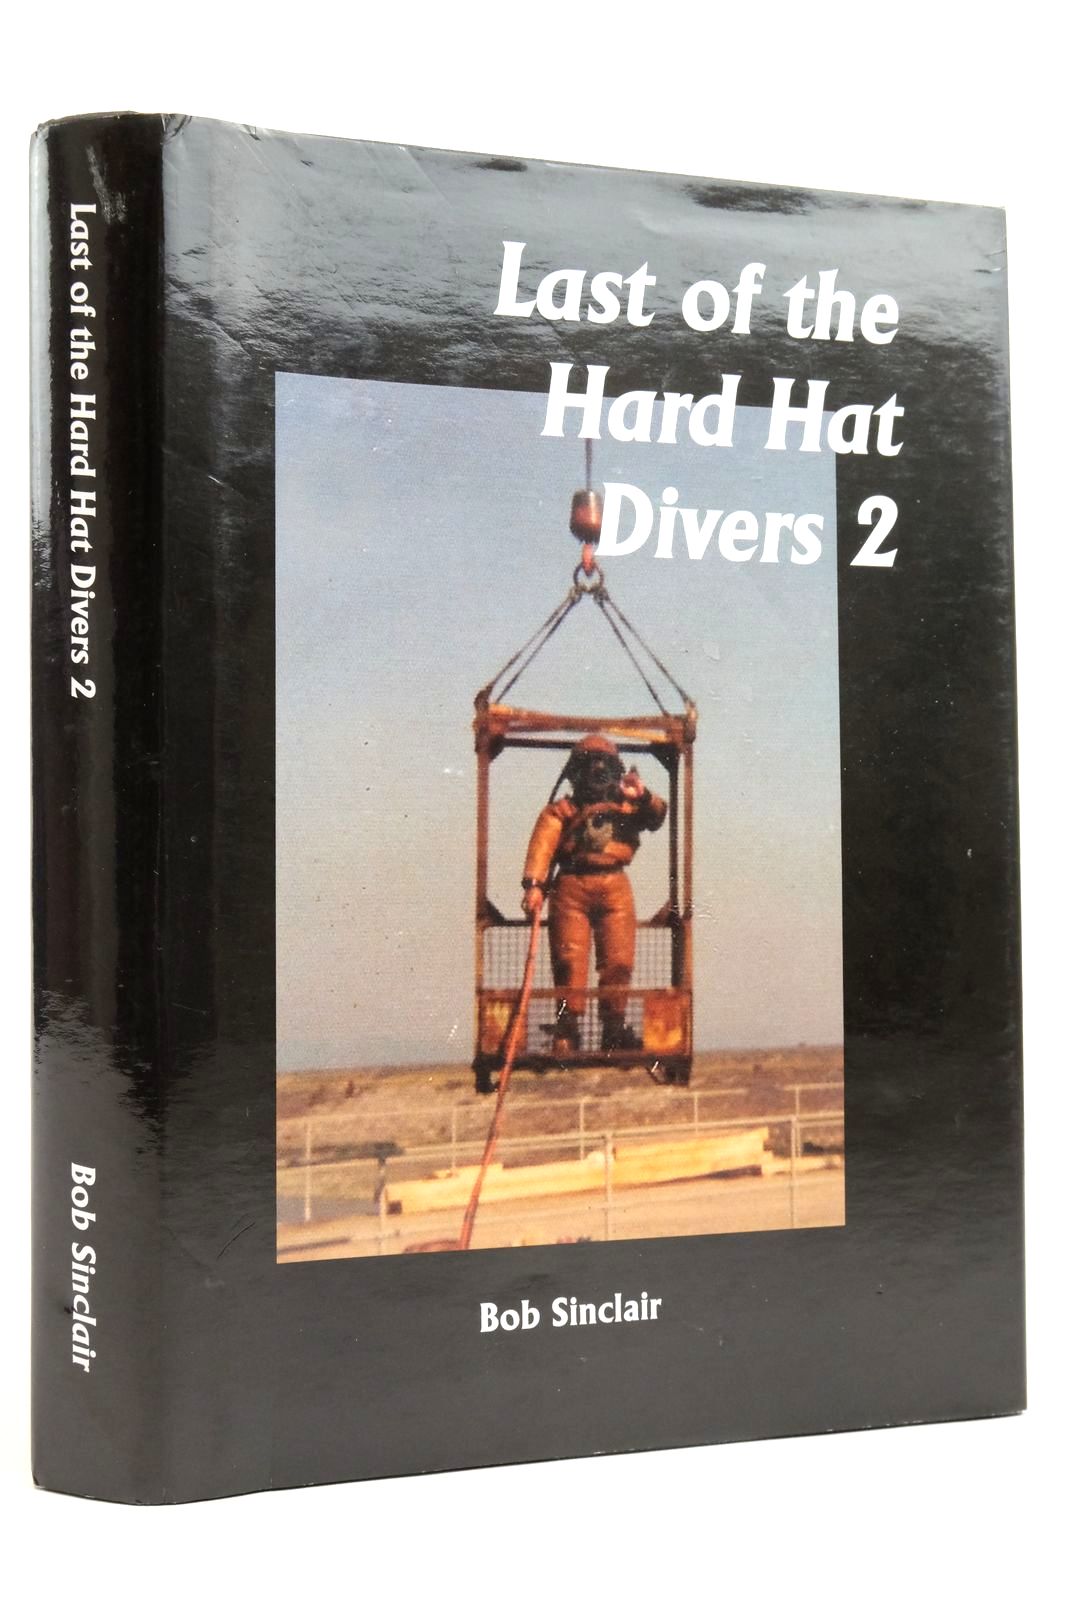 Photo of LAST OF THE HARD HAT DIVERS 2 written by Sinclair, Bob published by Bob Sinclair (STOCK CODE: 2136526)  for sale by Stella & Rose's Books